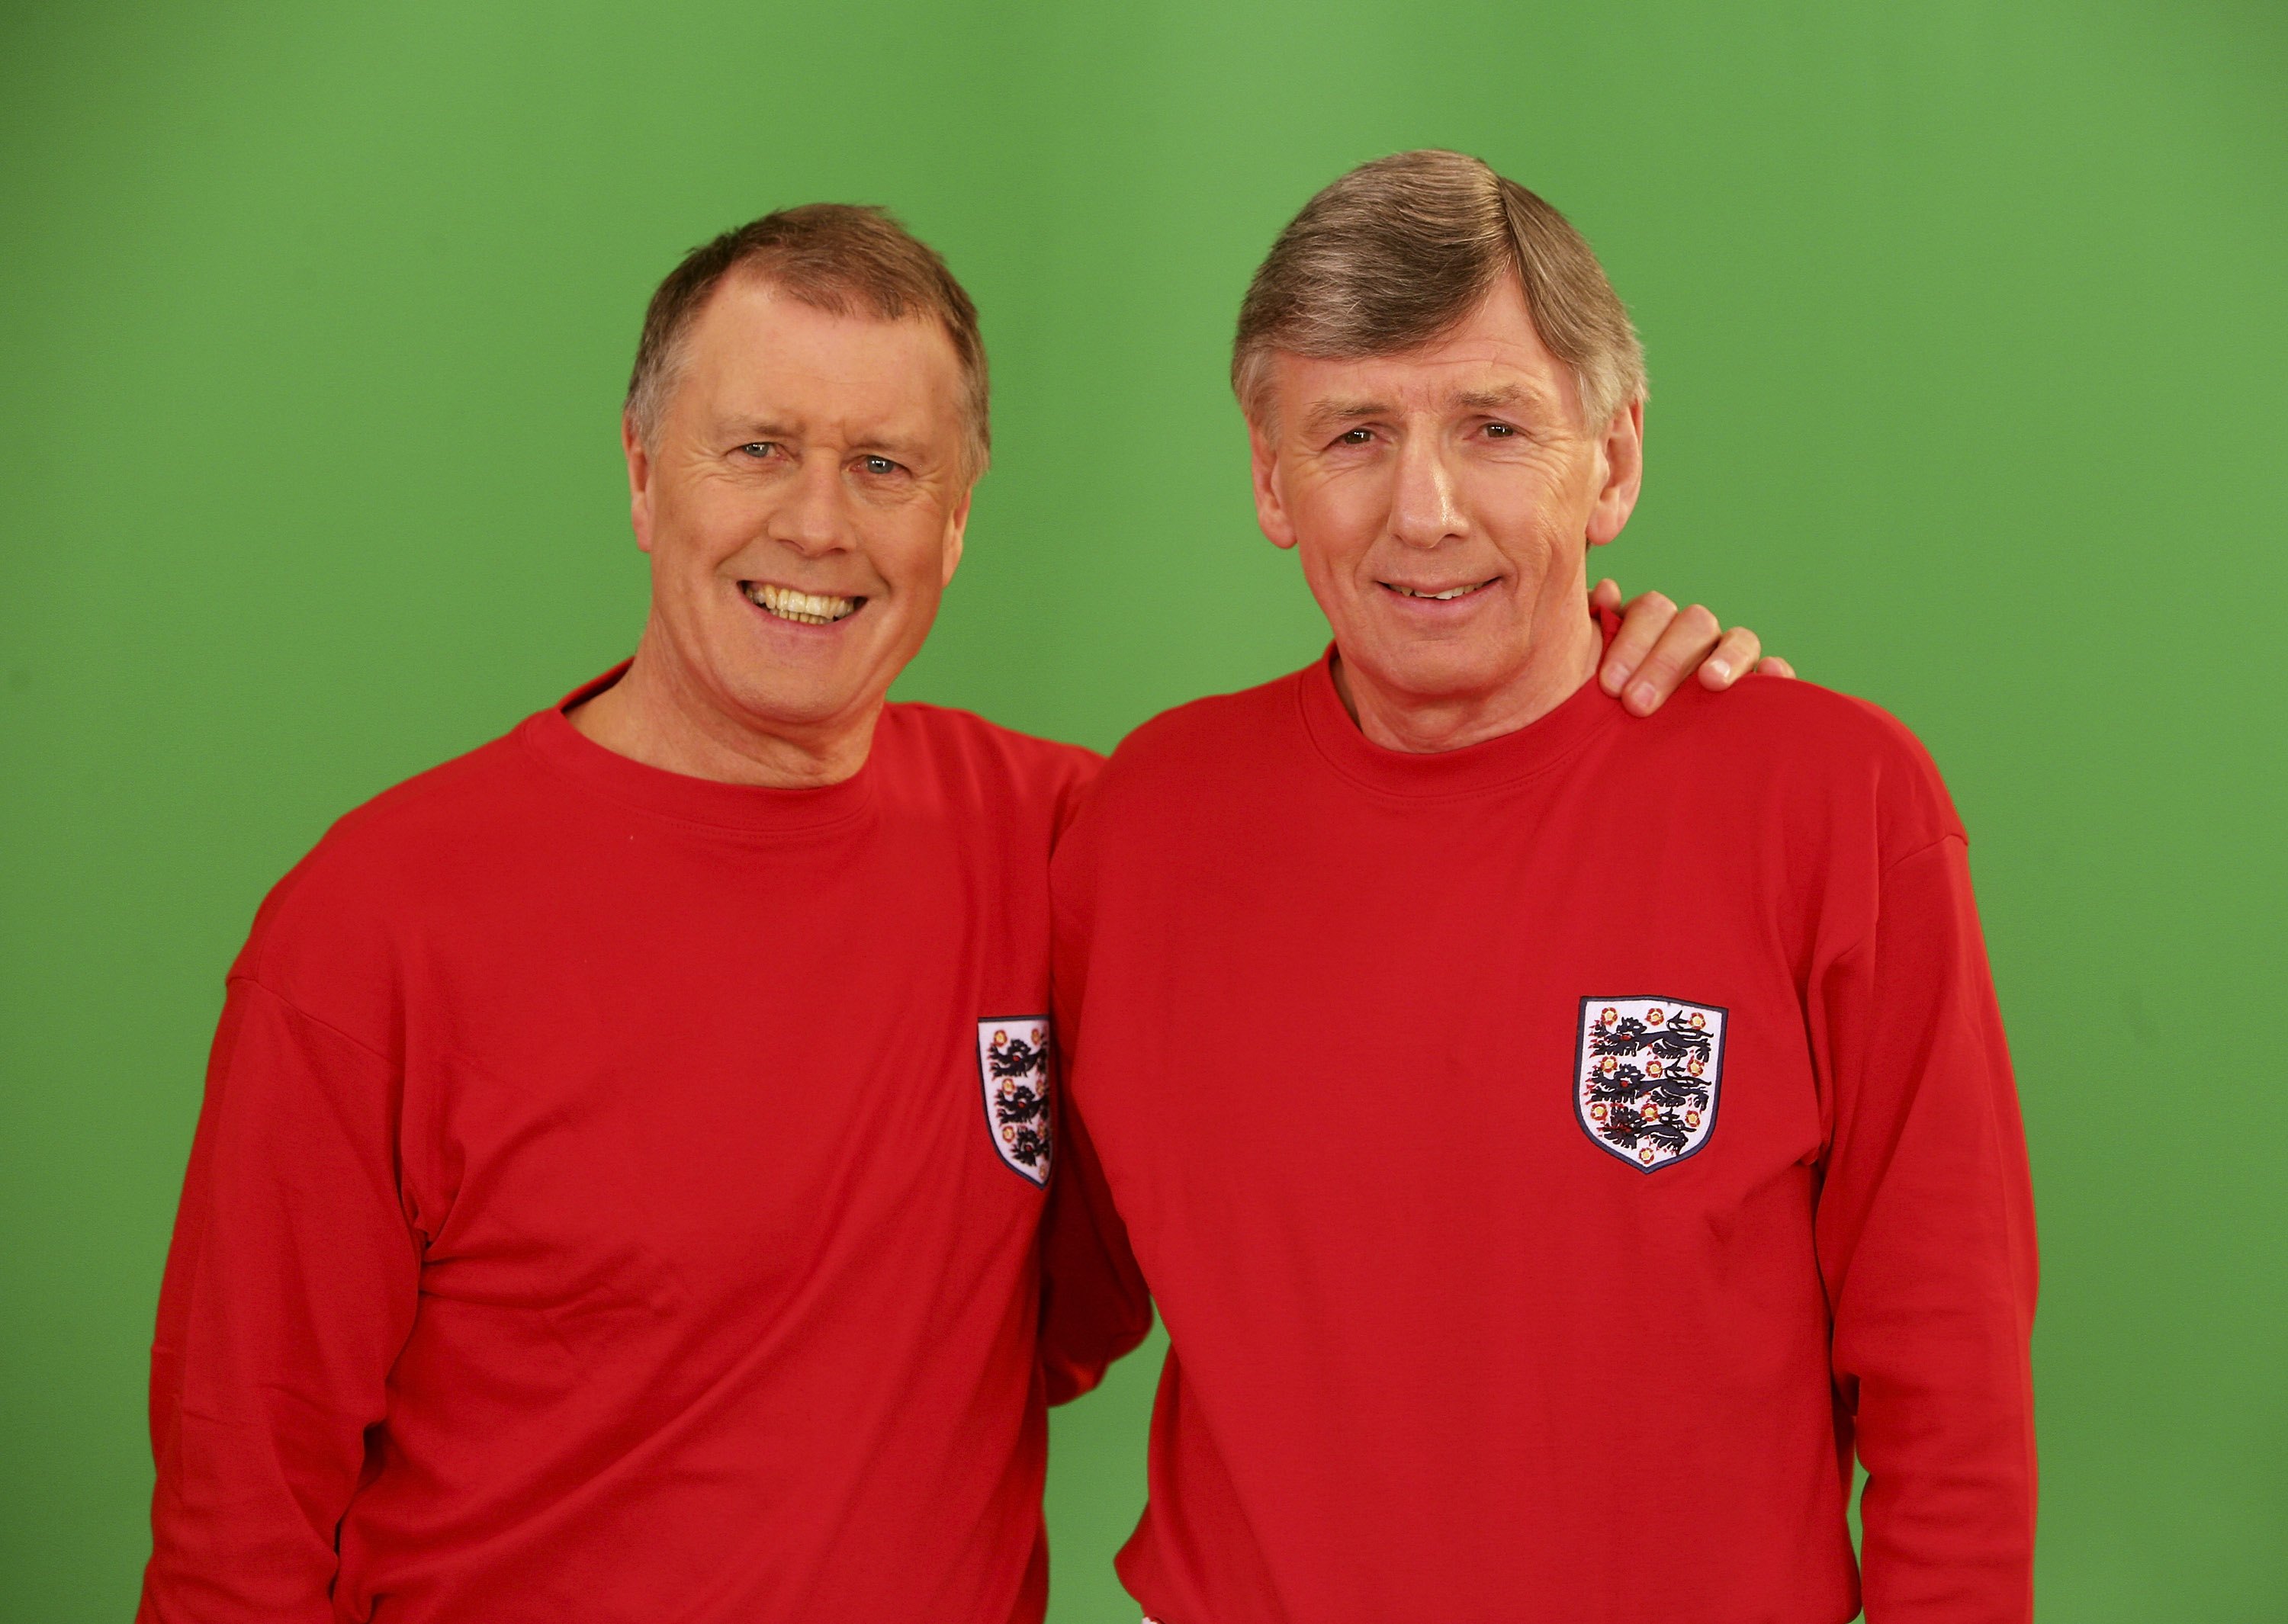 LONDON - APRIL 28:  (UK TABLOID NEWSPAPERS OUT)  Members of the 1966 England World Cup team Sir Geoff Hurst (L) and Martin Peters are filmed for the video to accompany an England World Cup song 'Who Do You Think You Are Kidding, Jurgen Klinsmann' at Camde